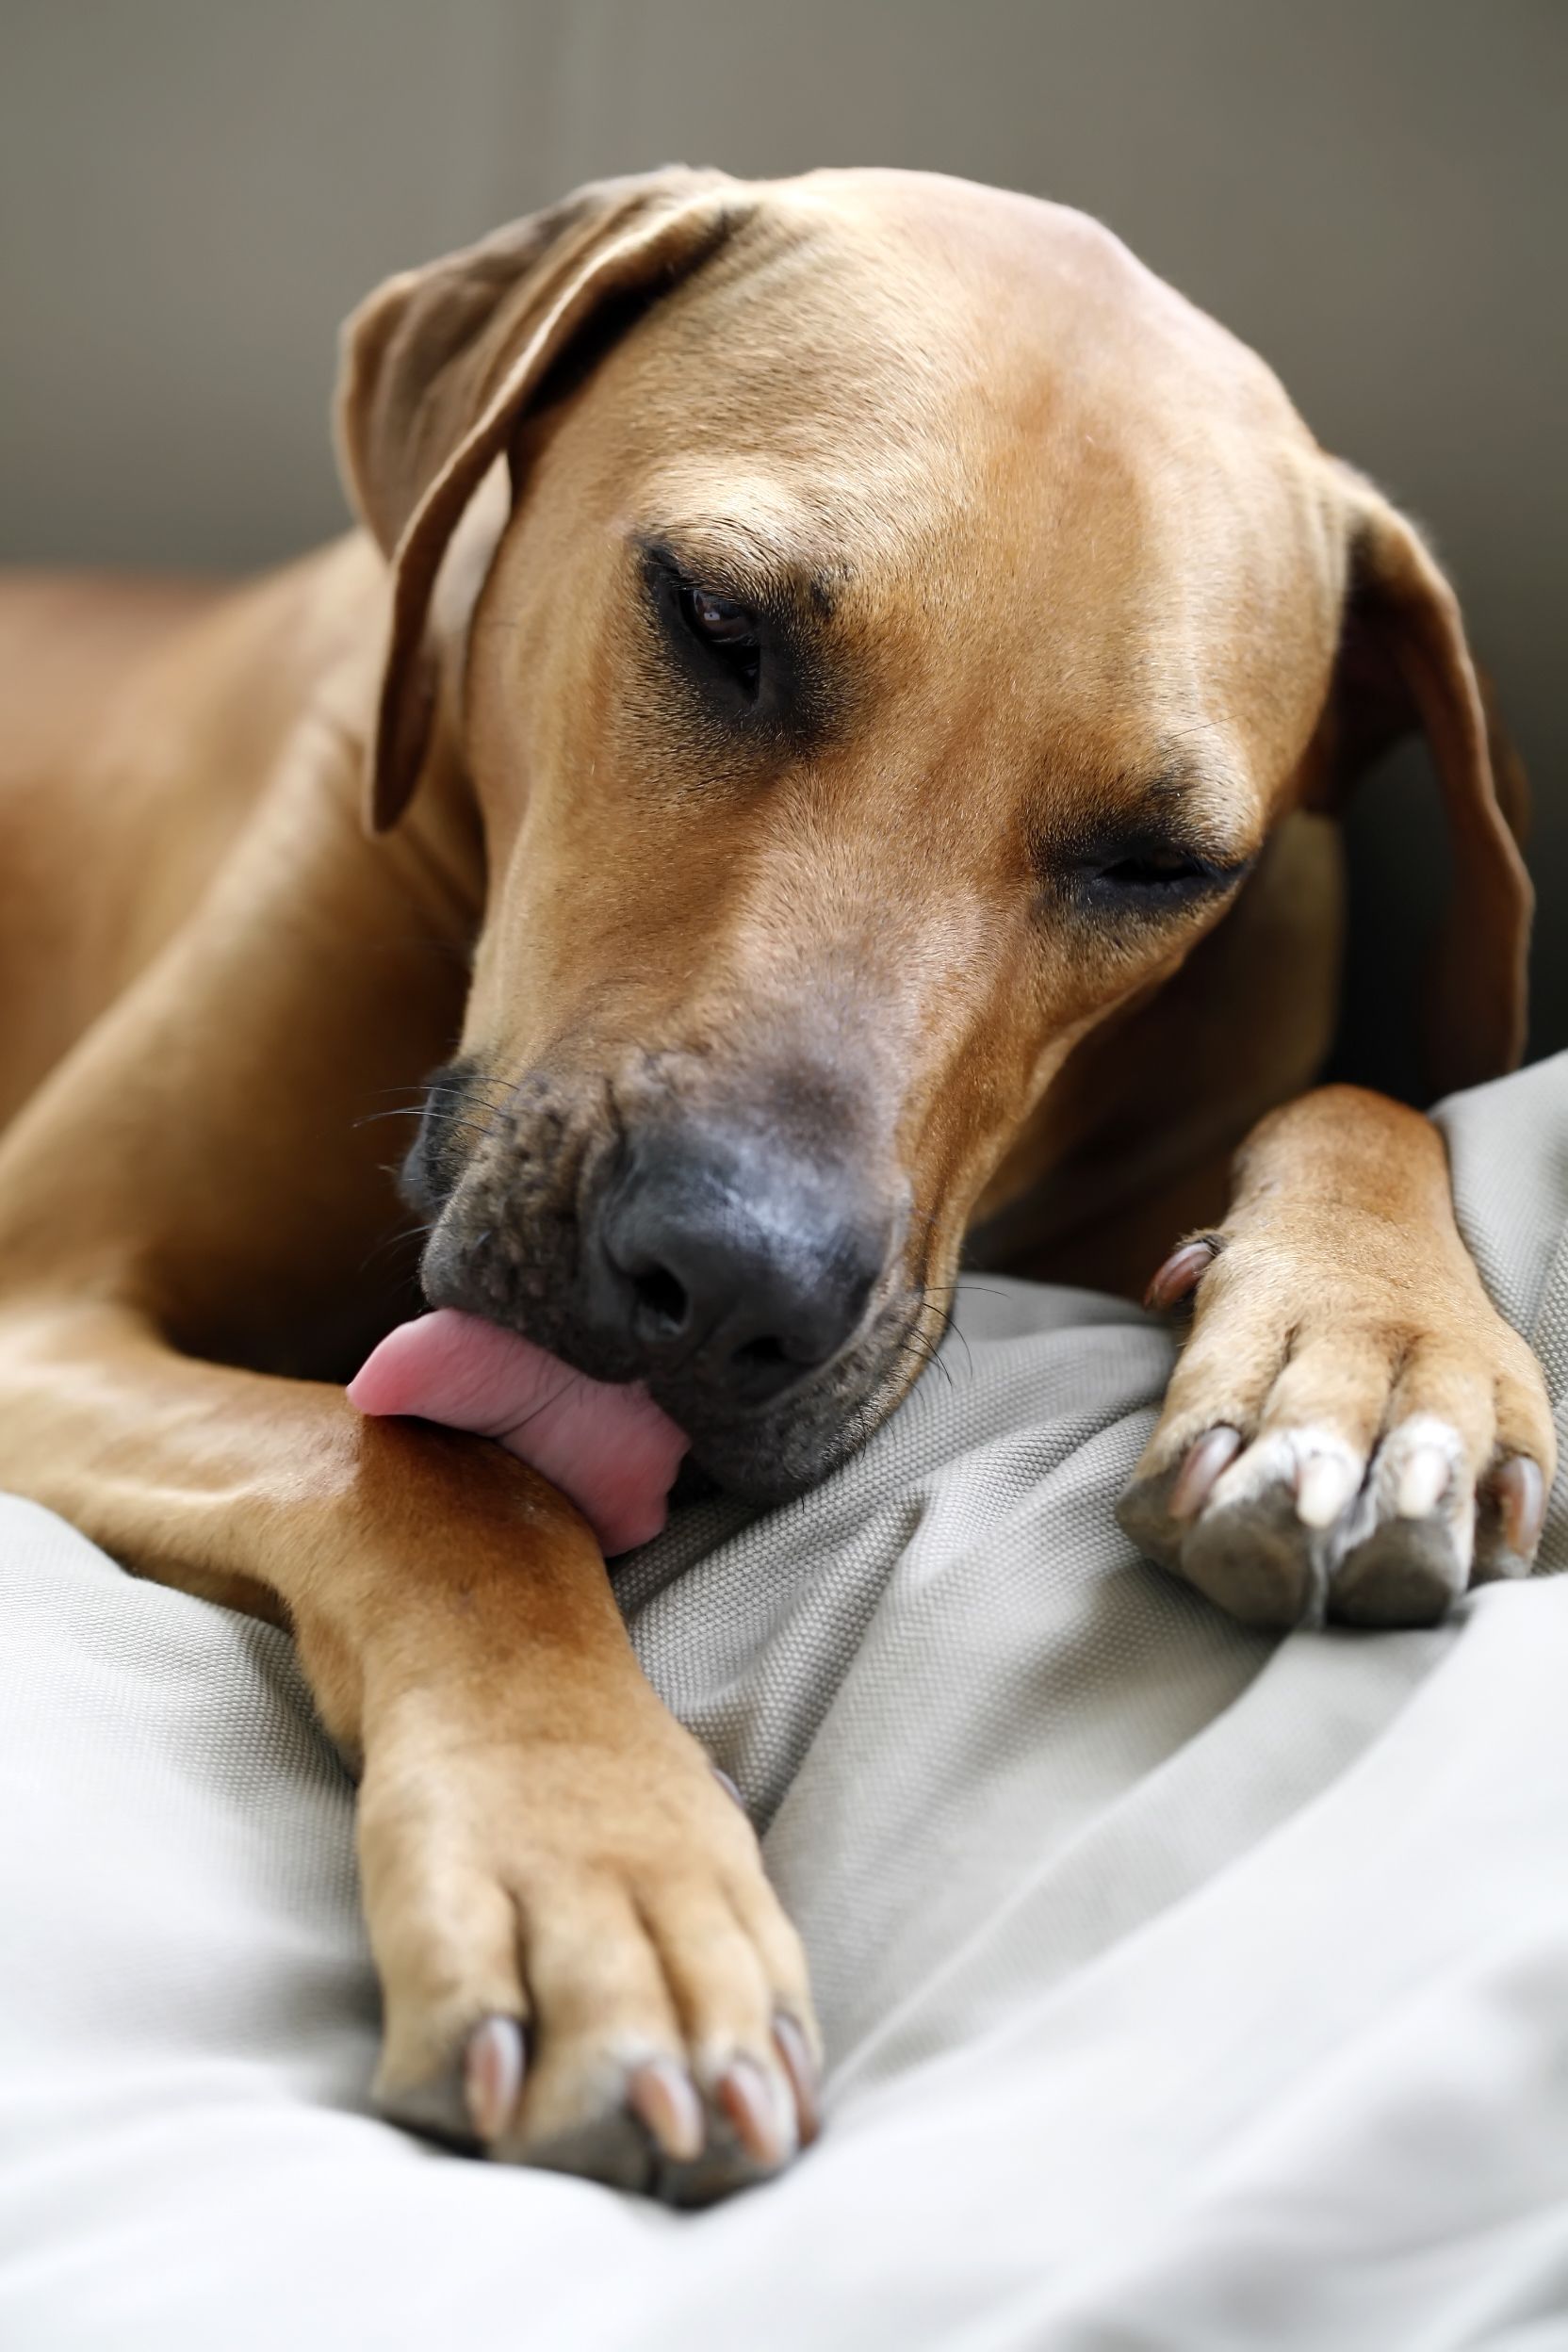 https://hips.hearstapps.com/hmg-prod/images/why-do-dogs-lick-their-paws-1623665178.jpg